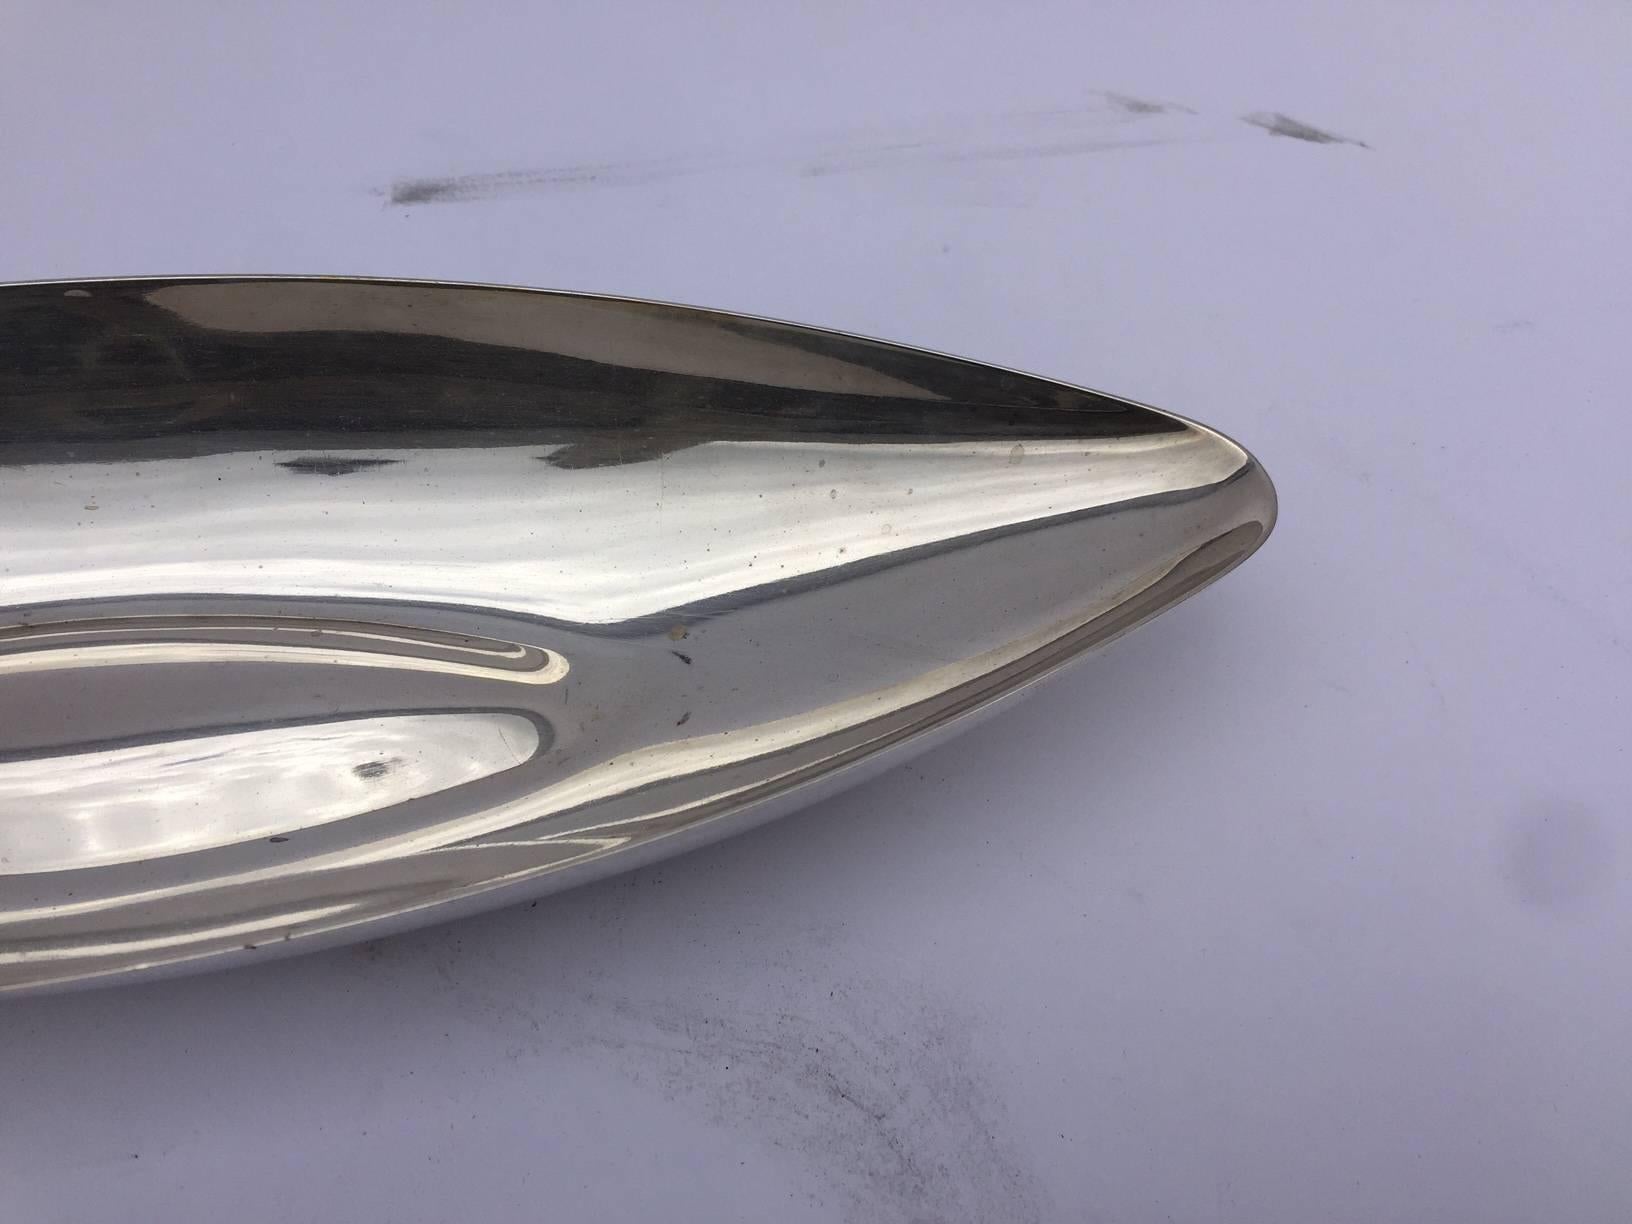 Dish by Sabattini chrome-plated in shape of the boat, circa 1970s, French.